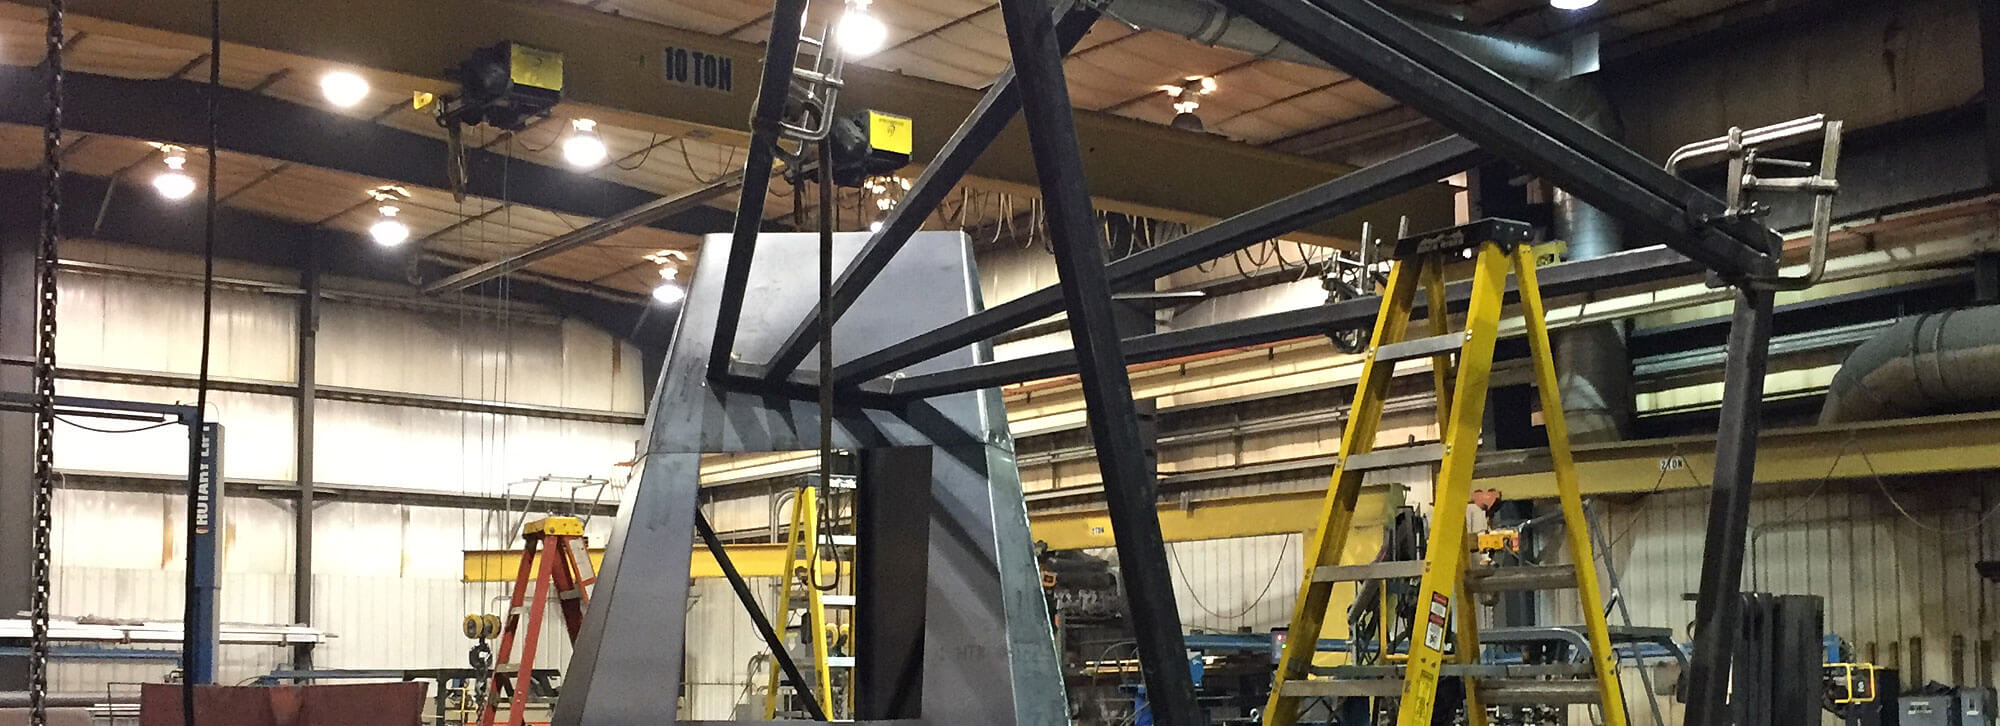 Custom metal structure fabricated by Millwood Metalworks in Freeport, MN